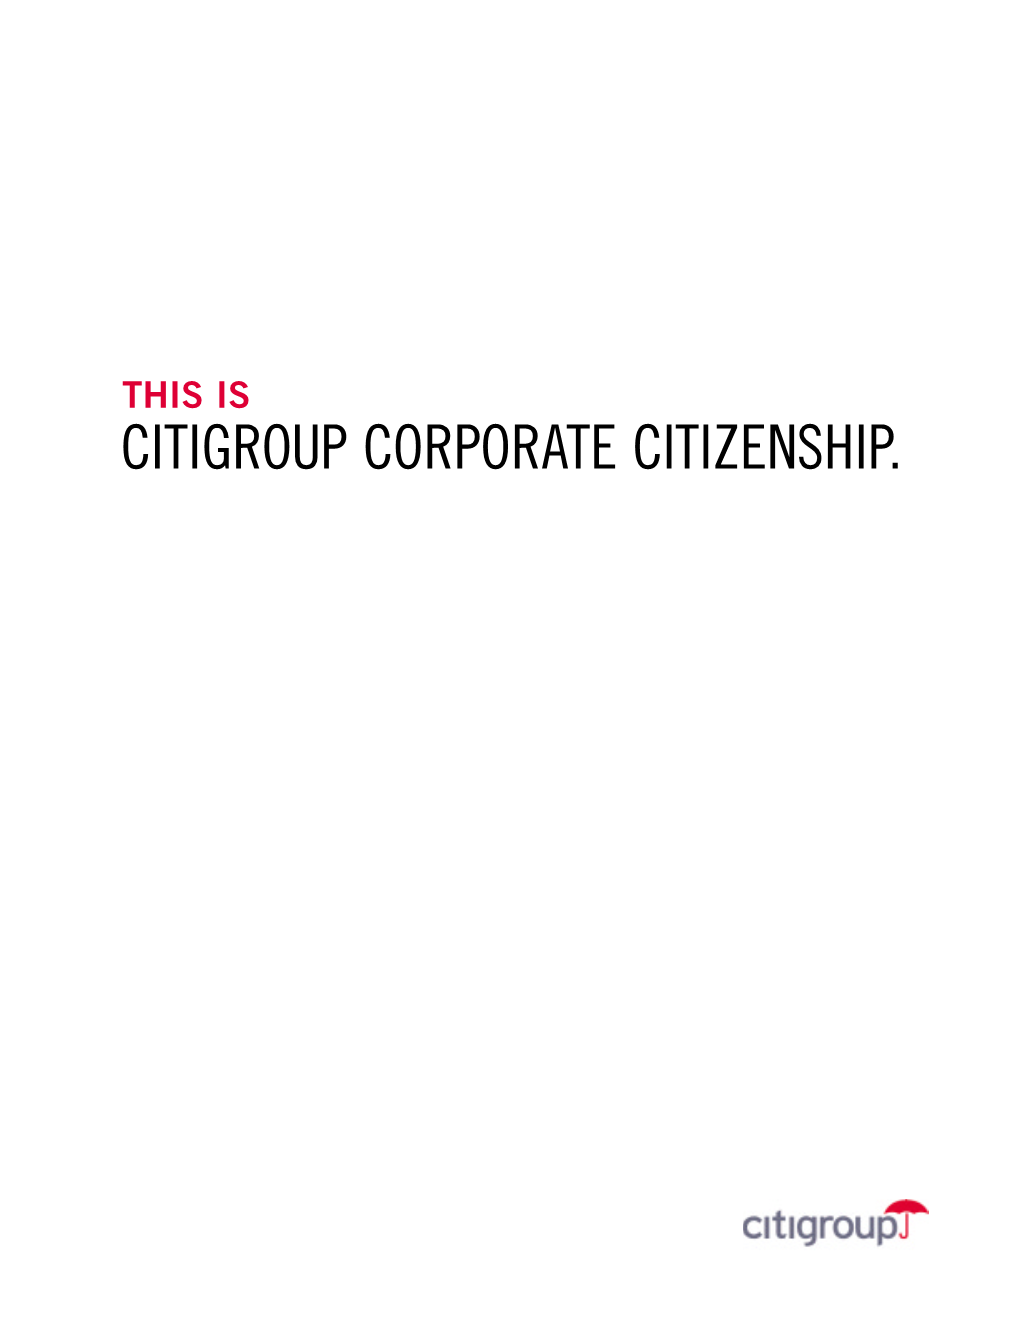 Citigroup Corporate Citizenship. This Is Citigroup